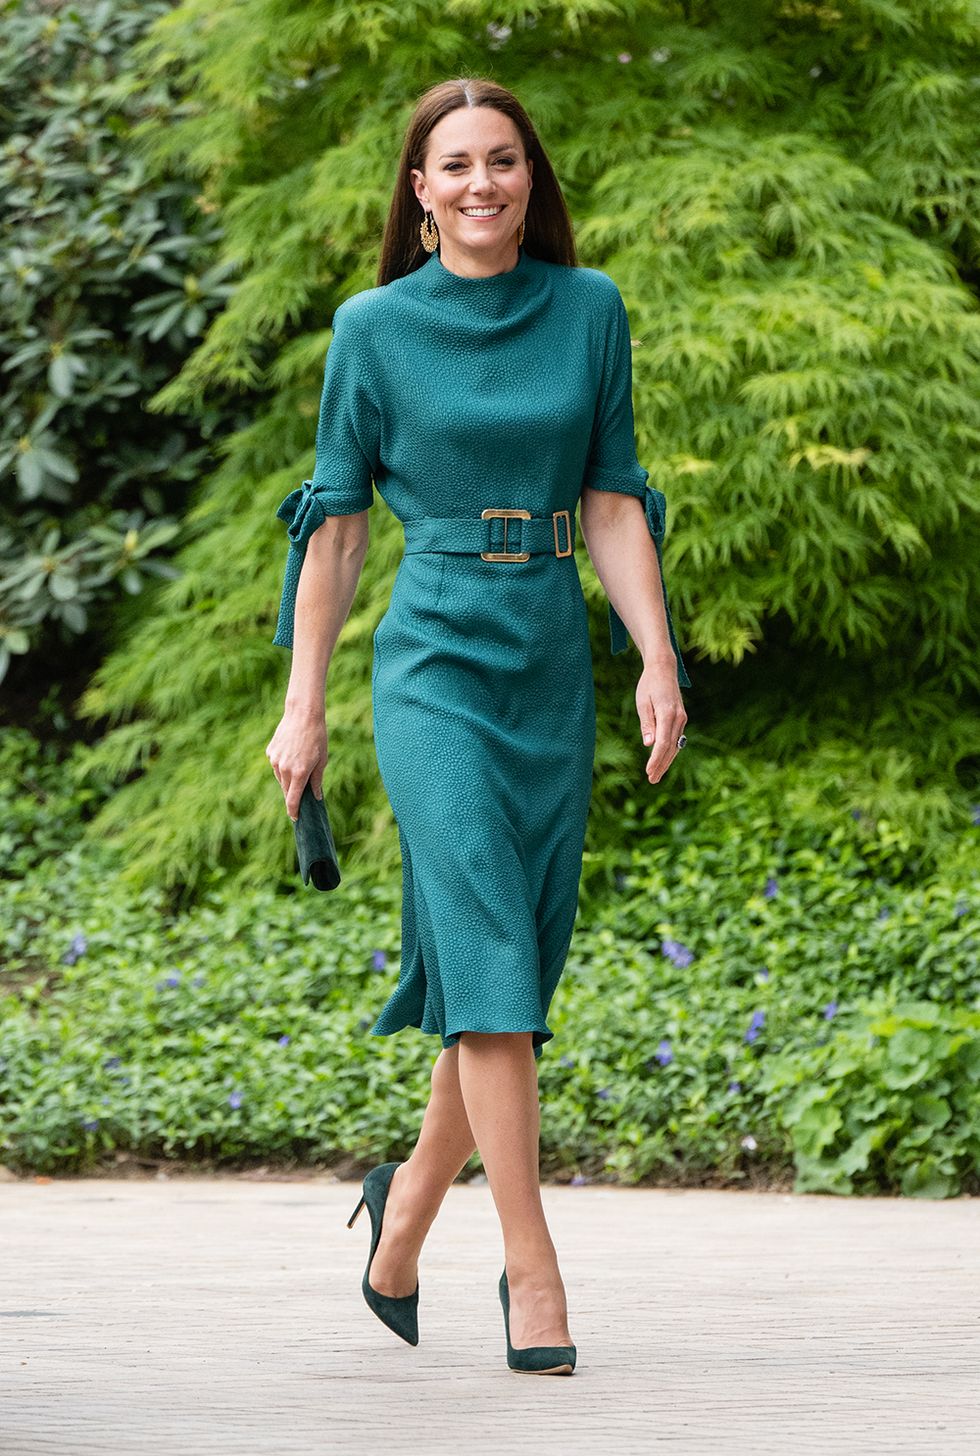 Kate Middleton makes a statement in stunning green belted dress at